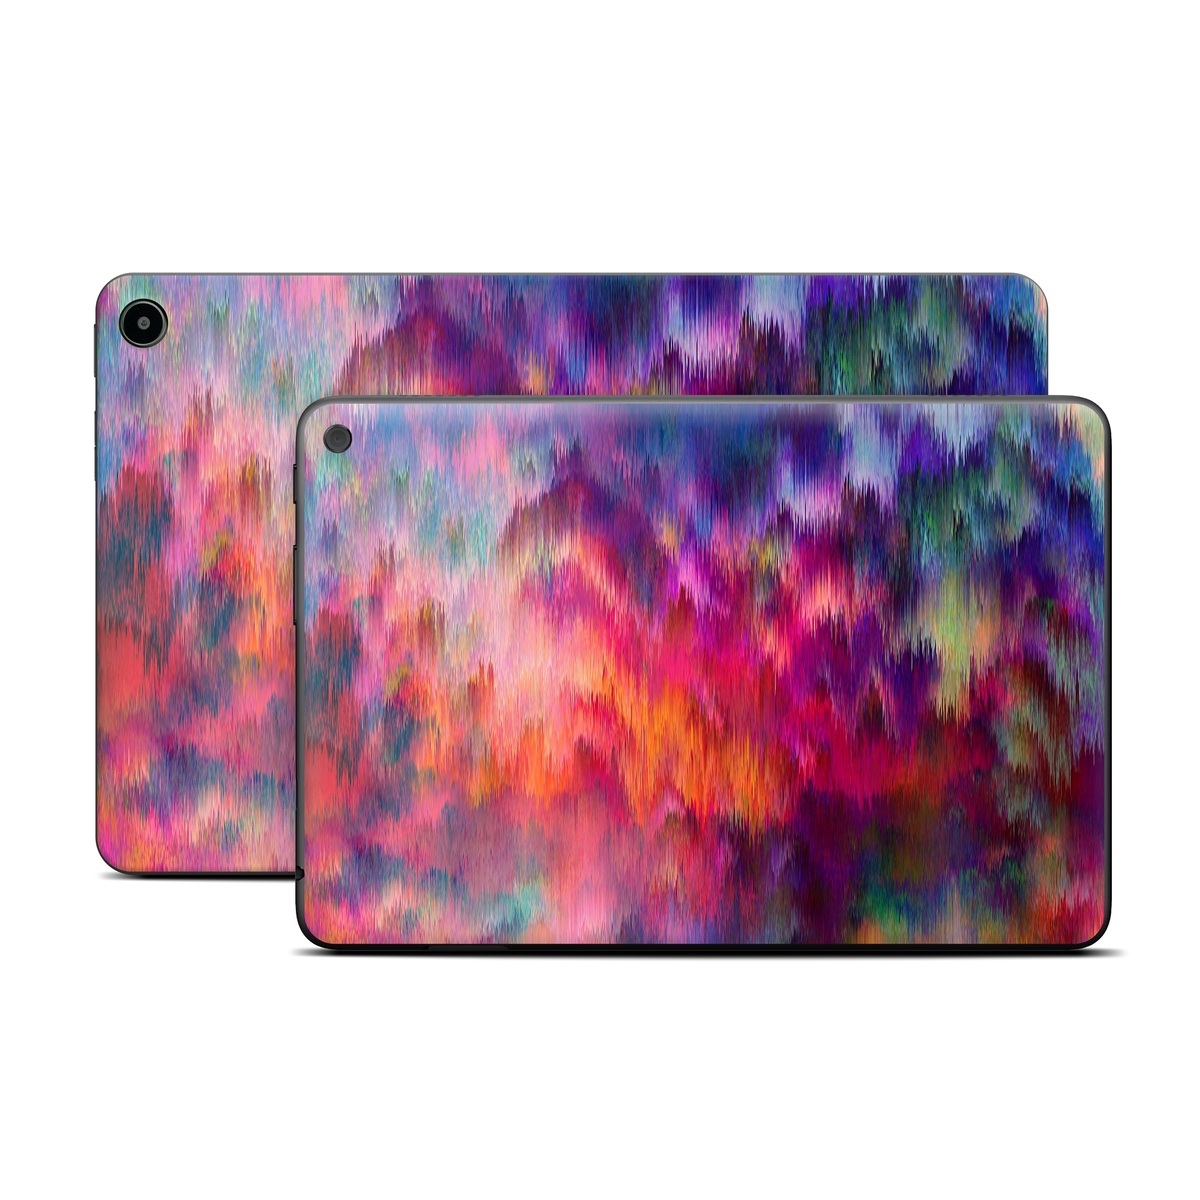 Amazon Fire Tablet Series Skin Skin design of Sky, Purple, Pink, Blue, Violet, Painting, Watercolor paint, Lavender, Cloud, Art, with red, blue, purple, orange, green colors